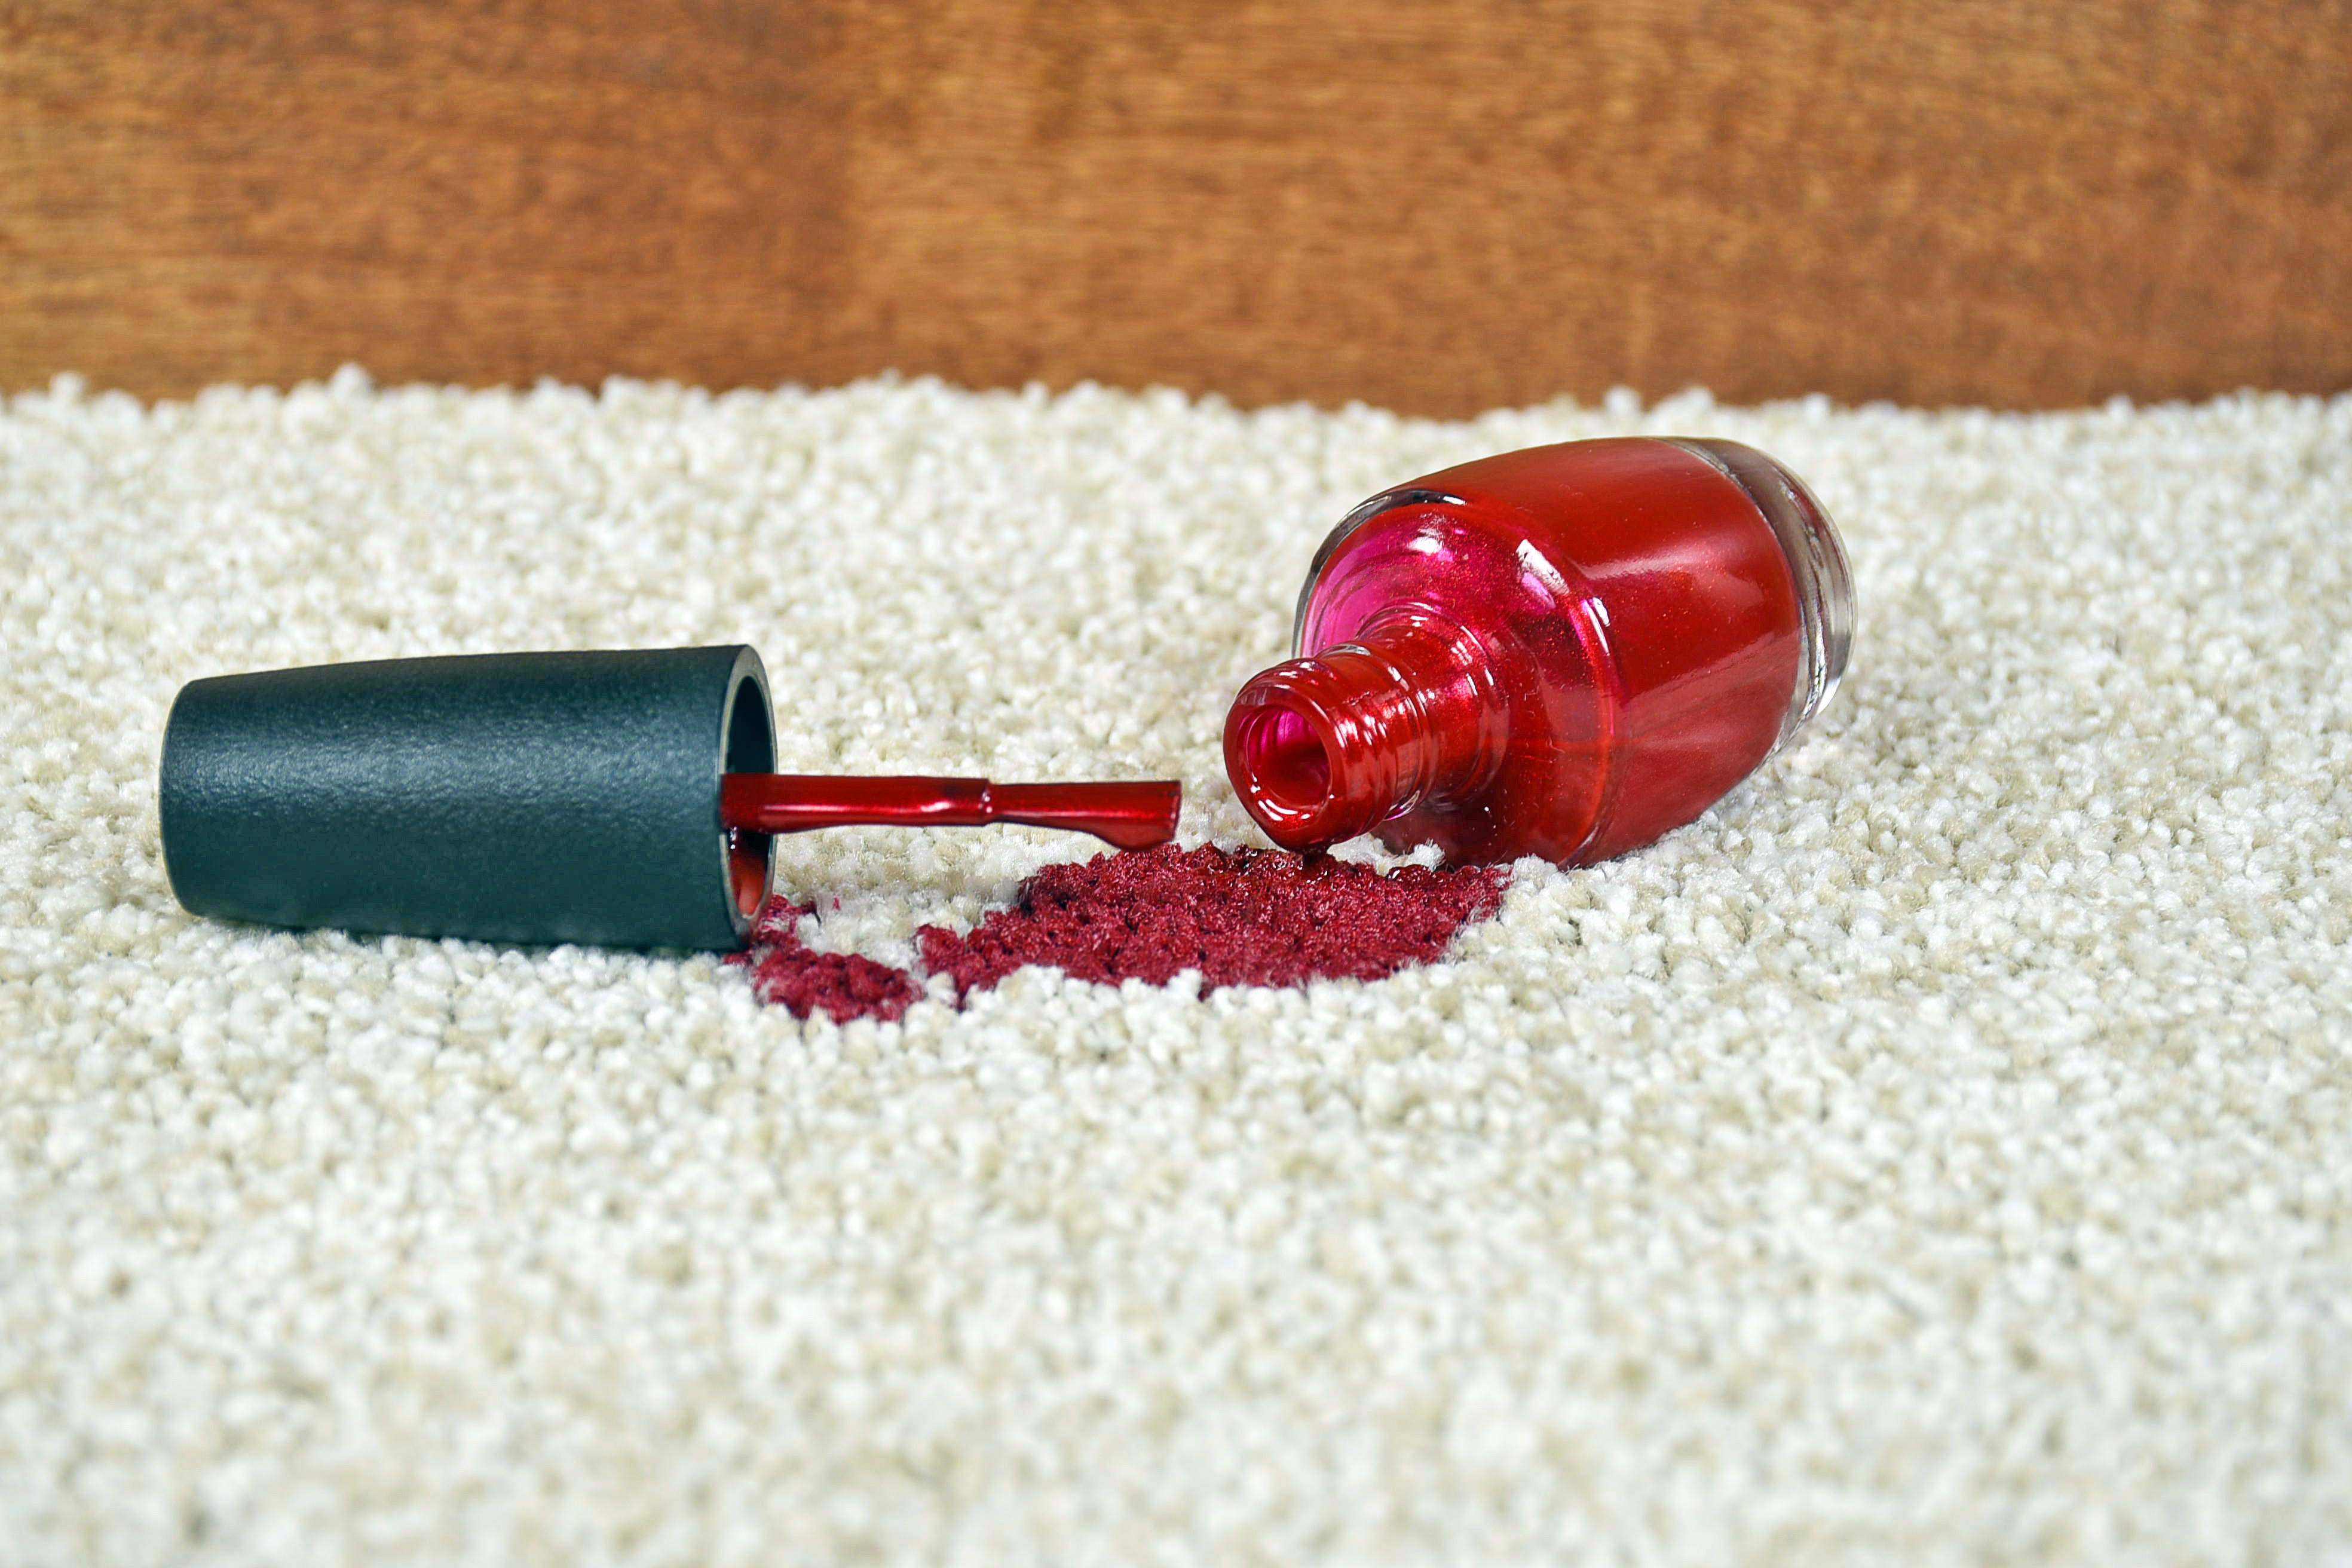 6 Tricks To Get Nail Polish Out Of Carpet